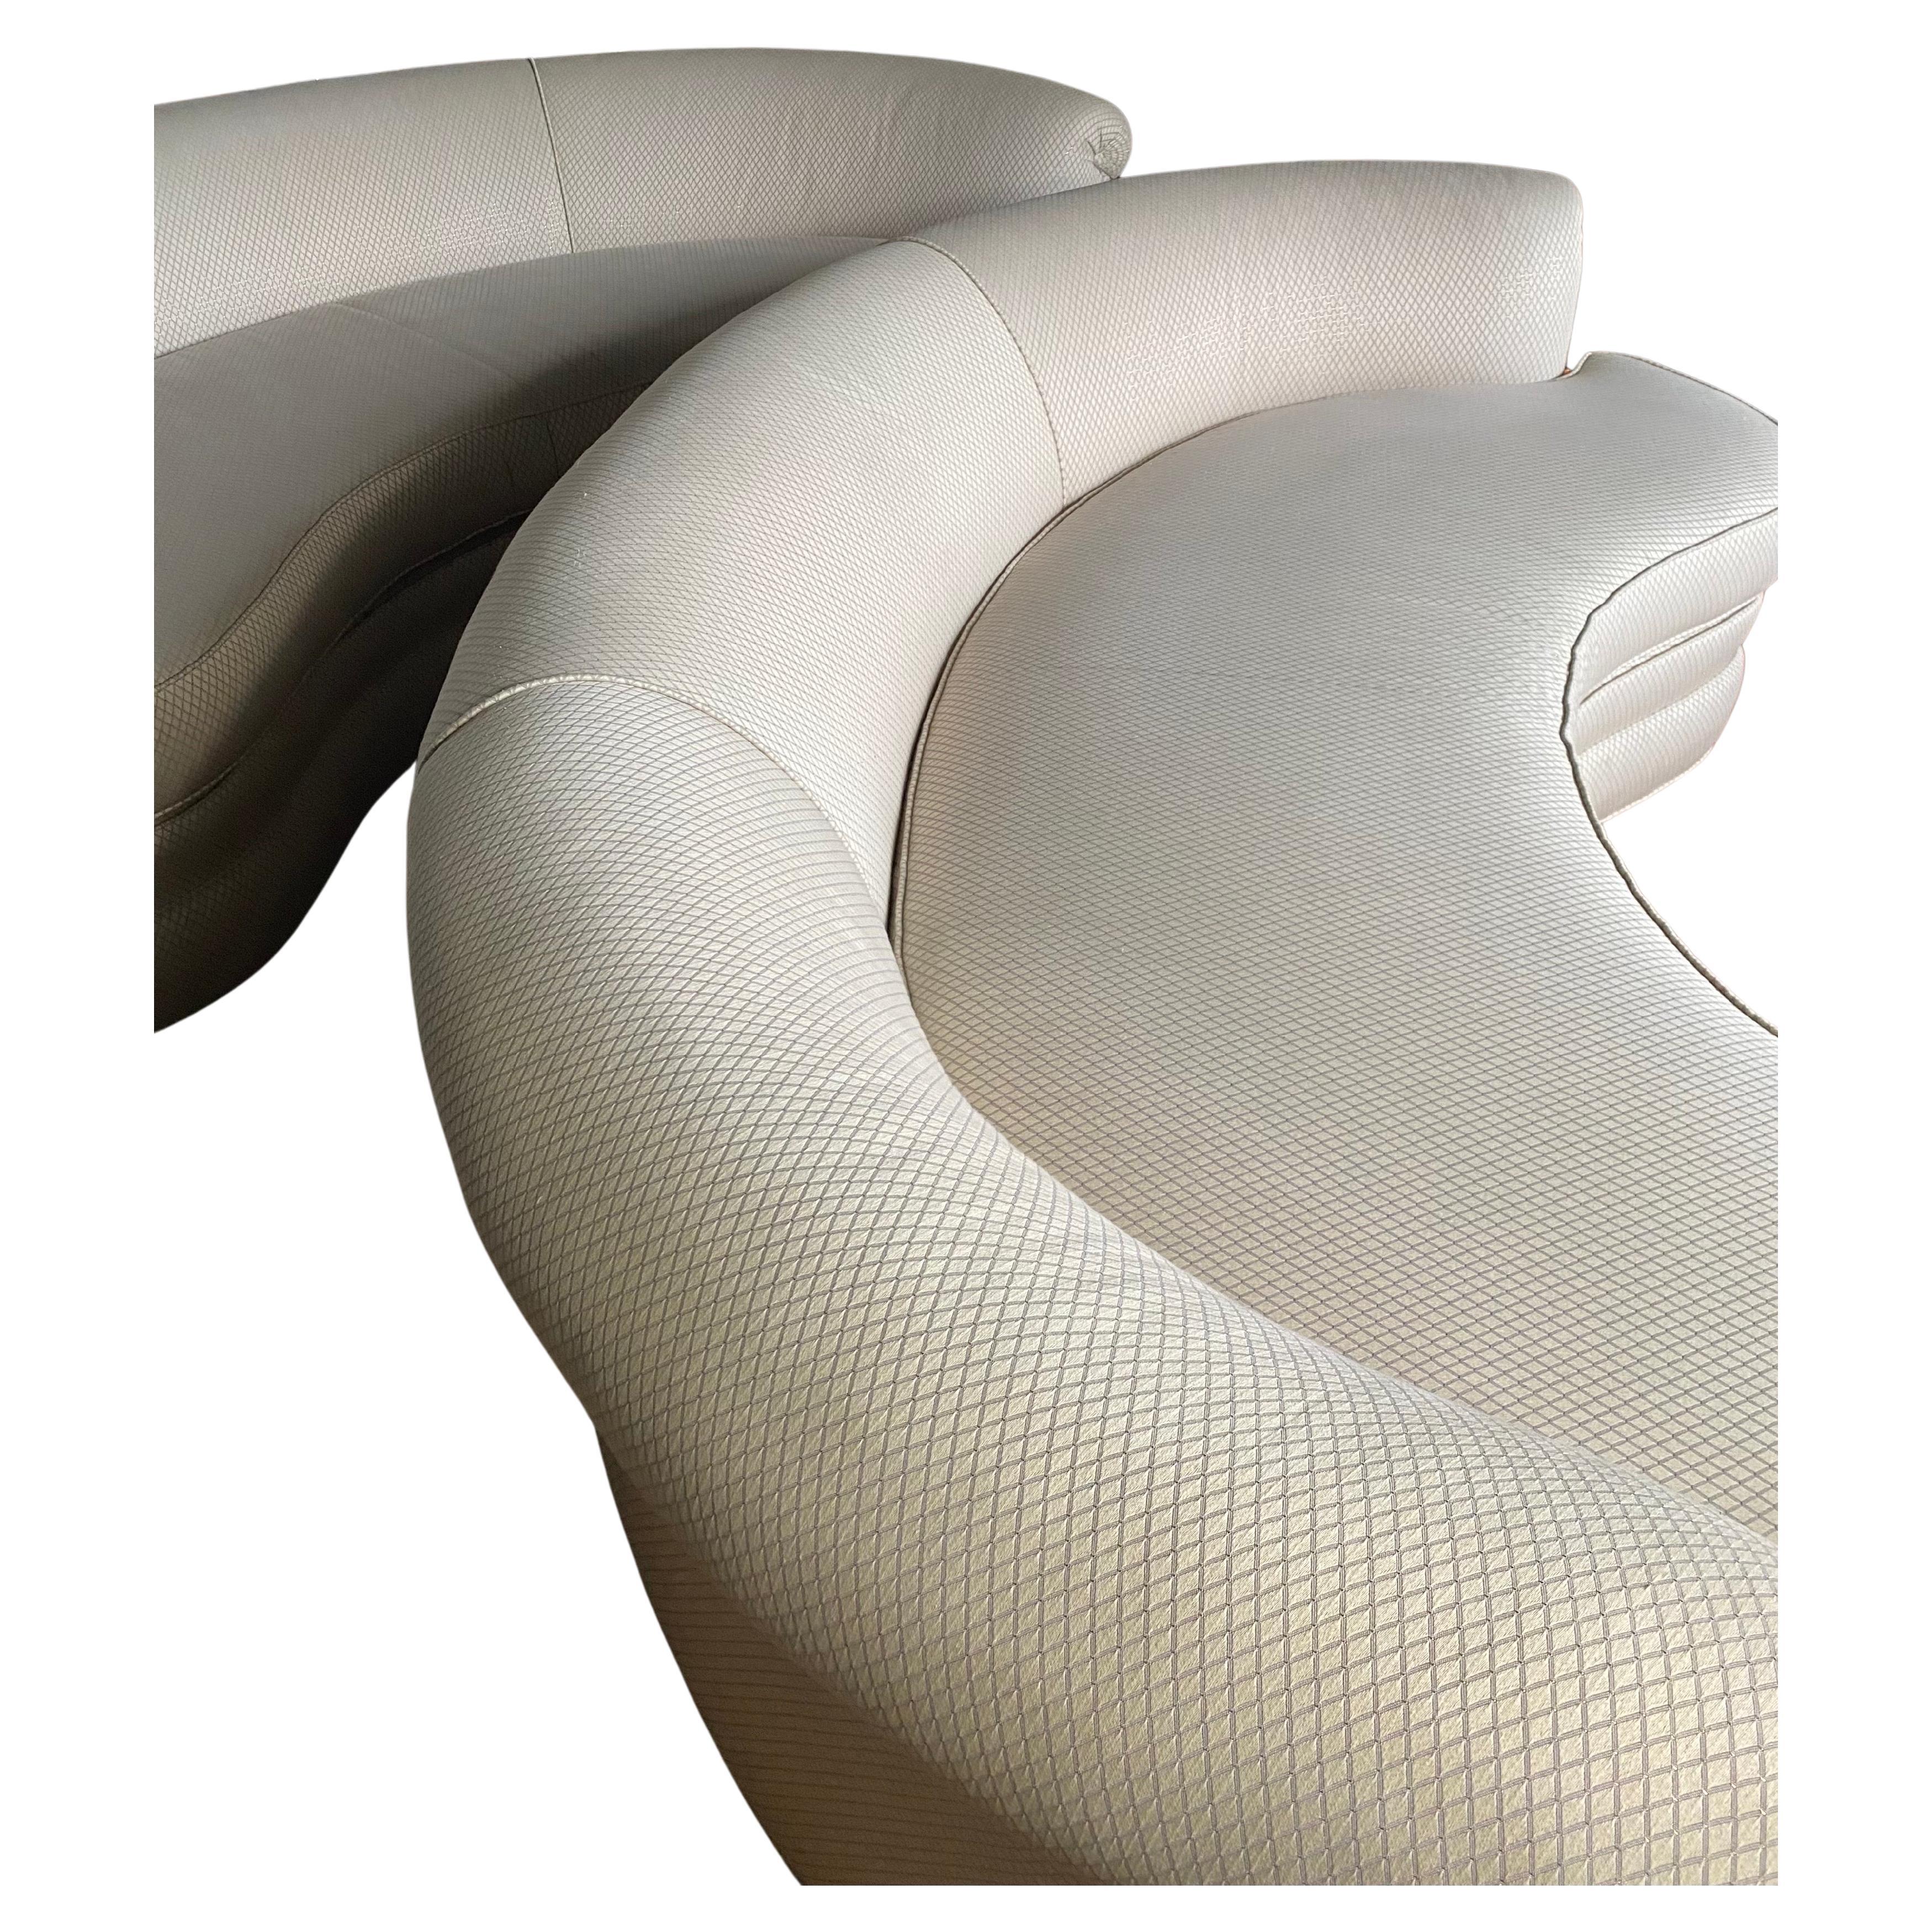 Mid-Century Modern Kidney Shaped Curved Serpentine Biomorphic Cloud Sofa For Sale 3